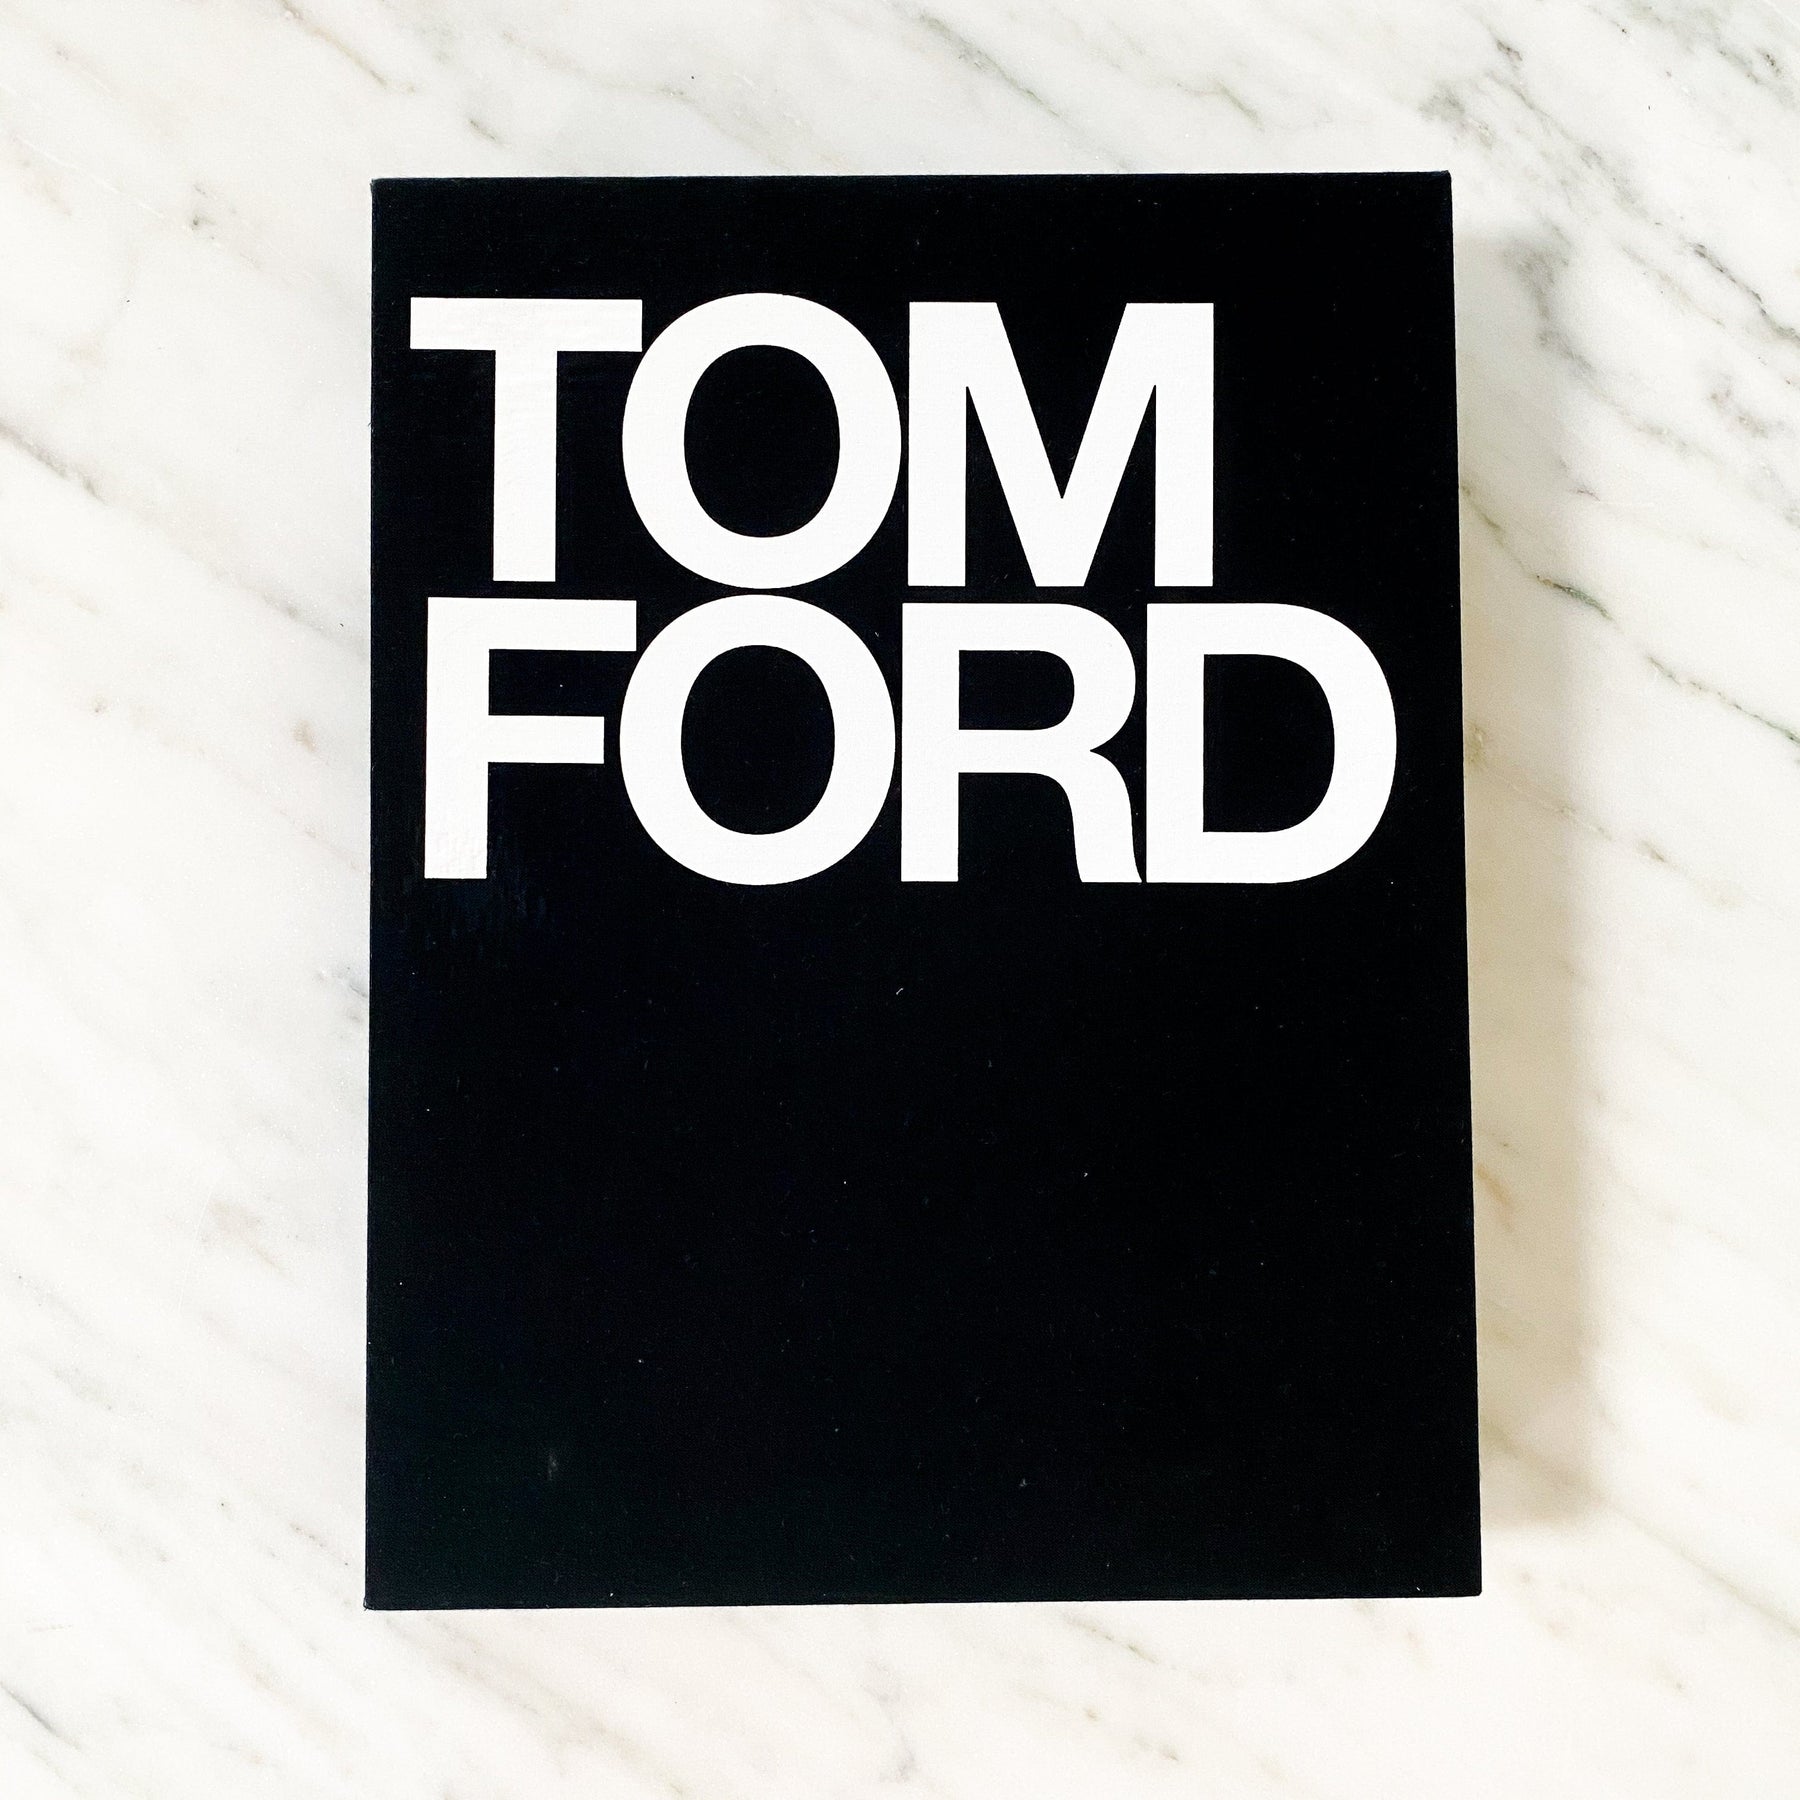 Tom Ford – Shop at Maison